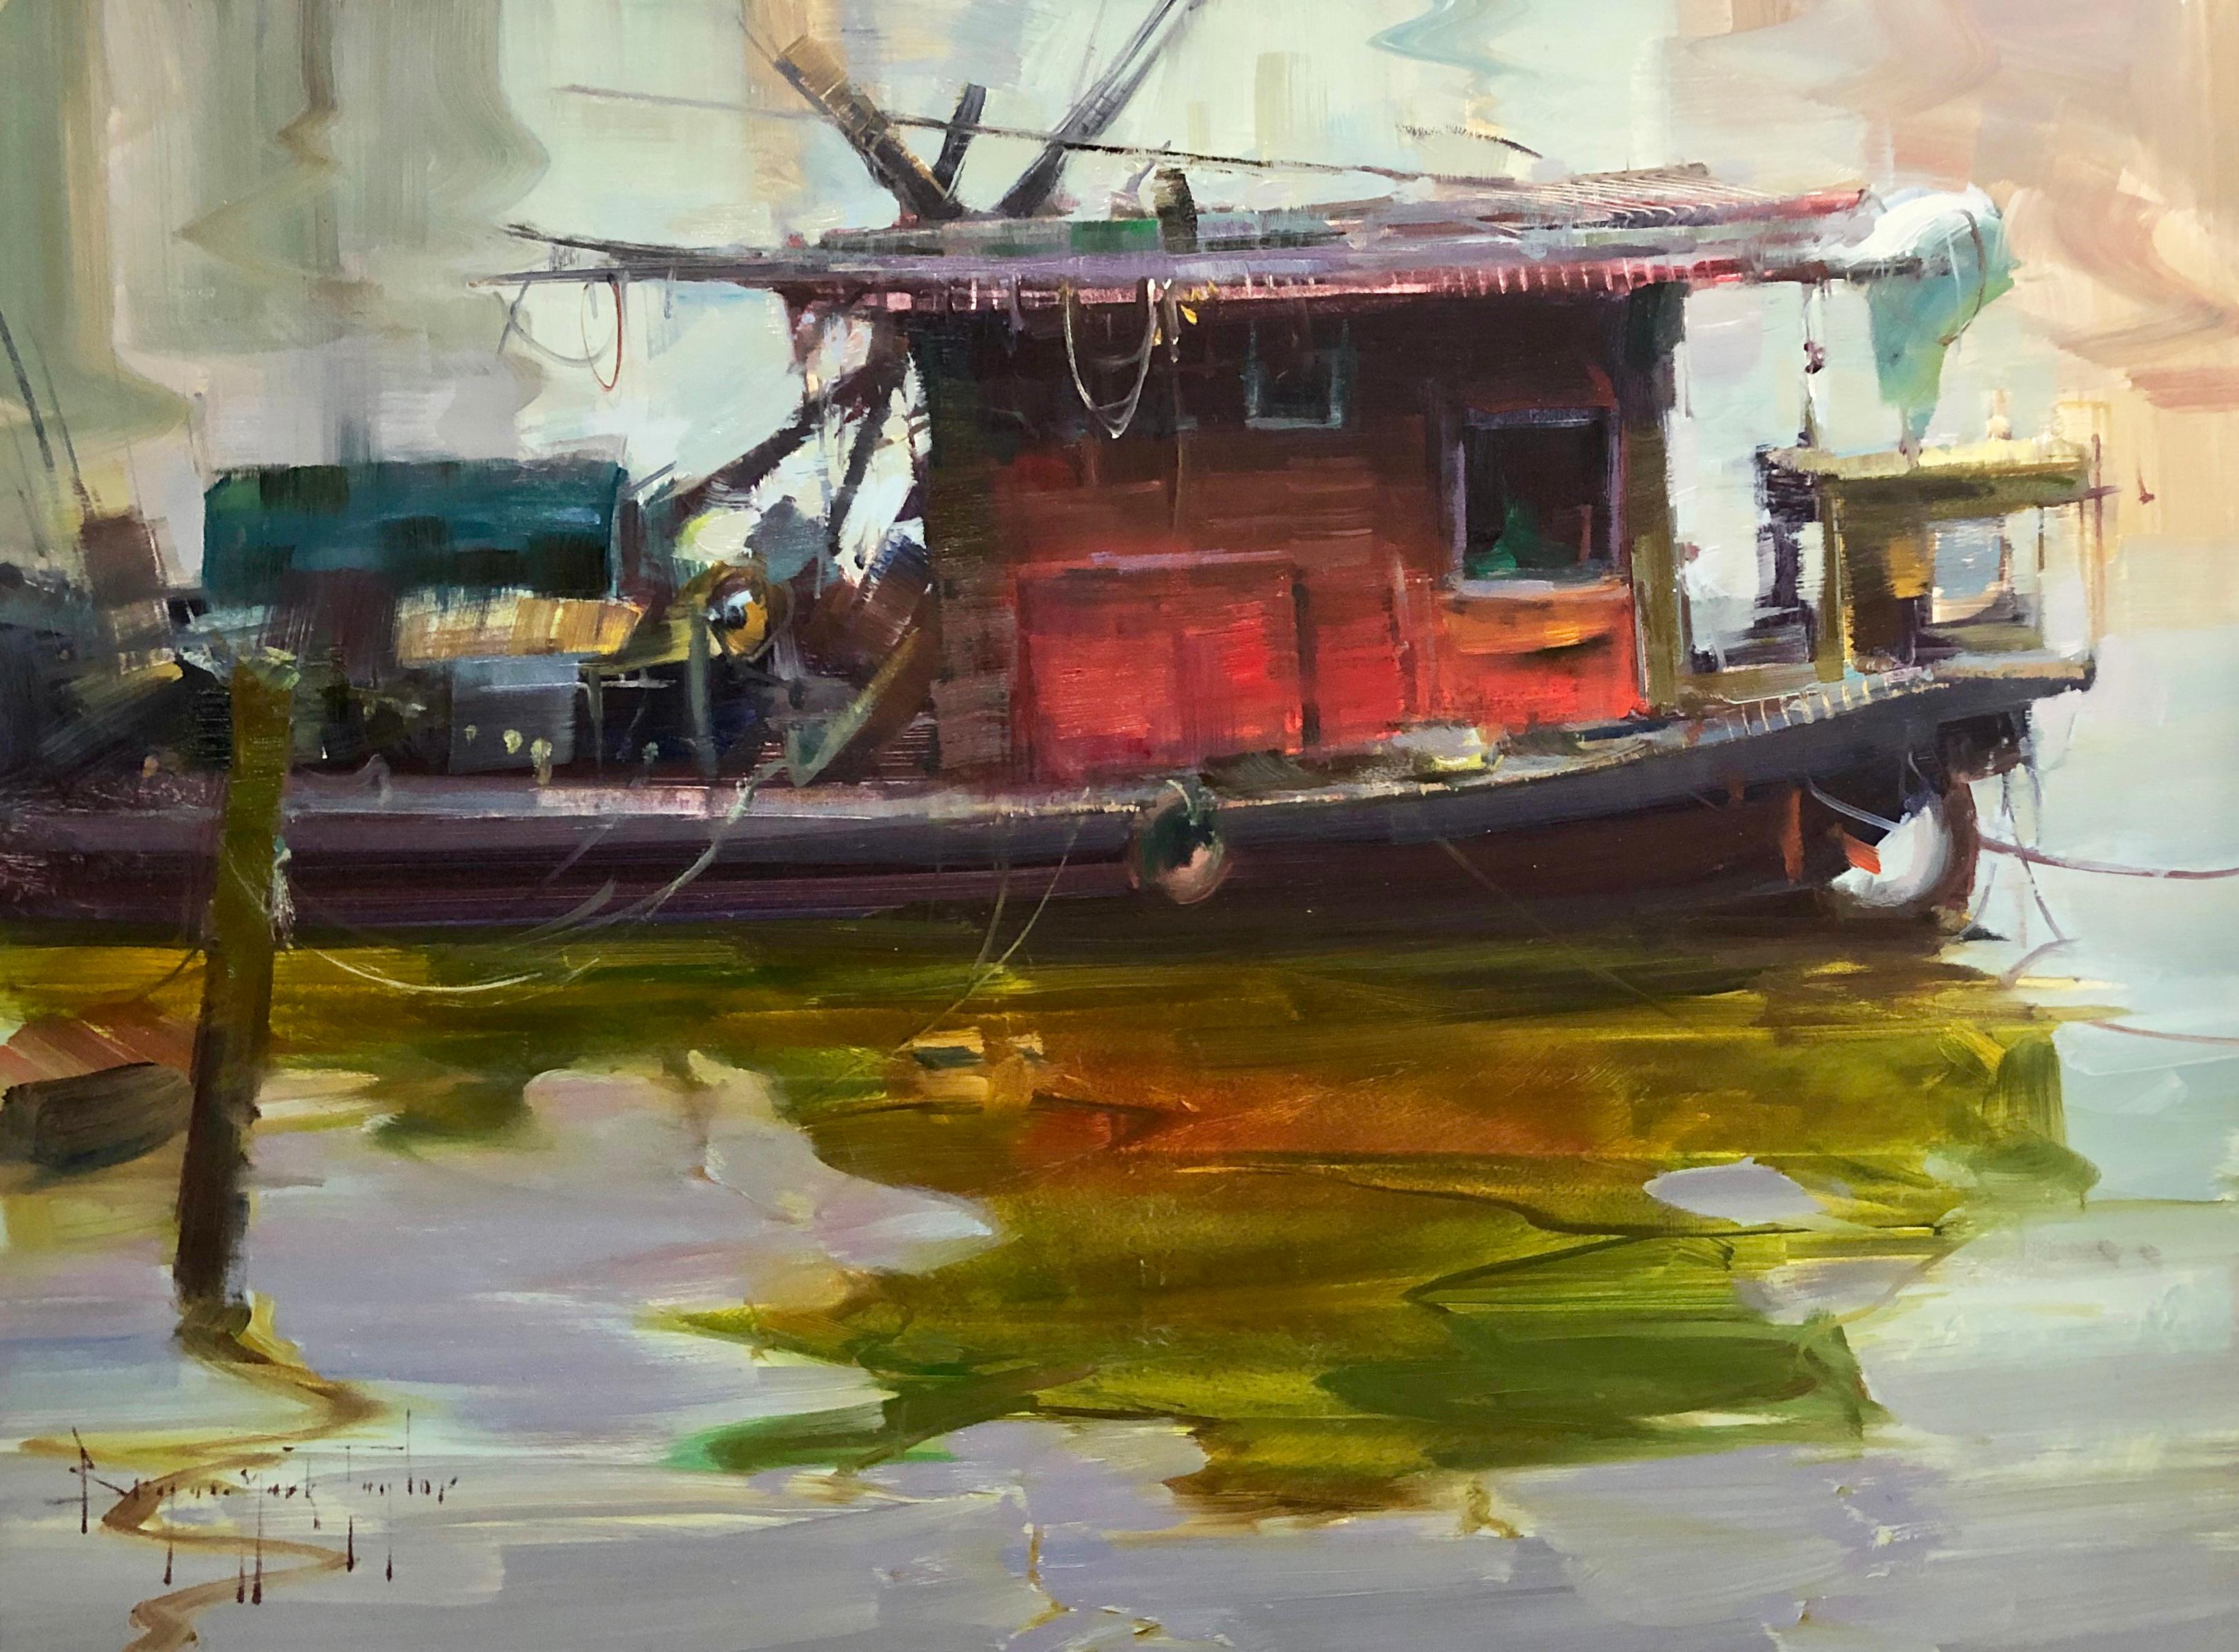 Bryan Mark Taylor Landscape Painting - Modern Impressionist China River Scene "Red Boat" Plein Air Oil 